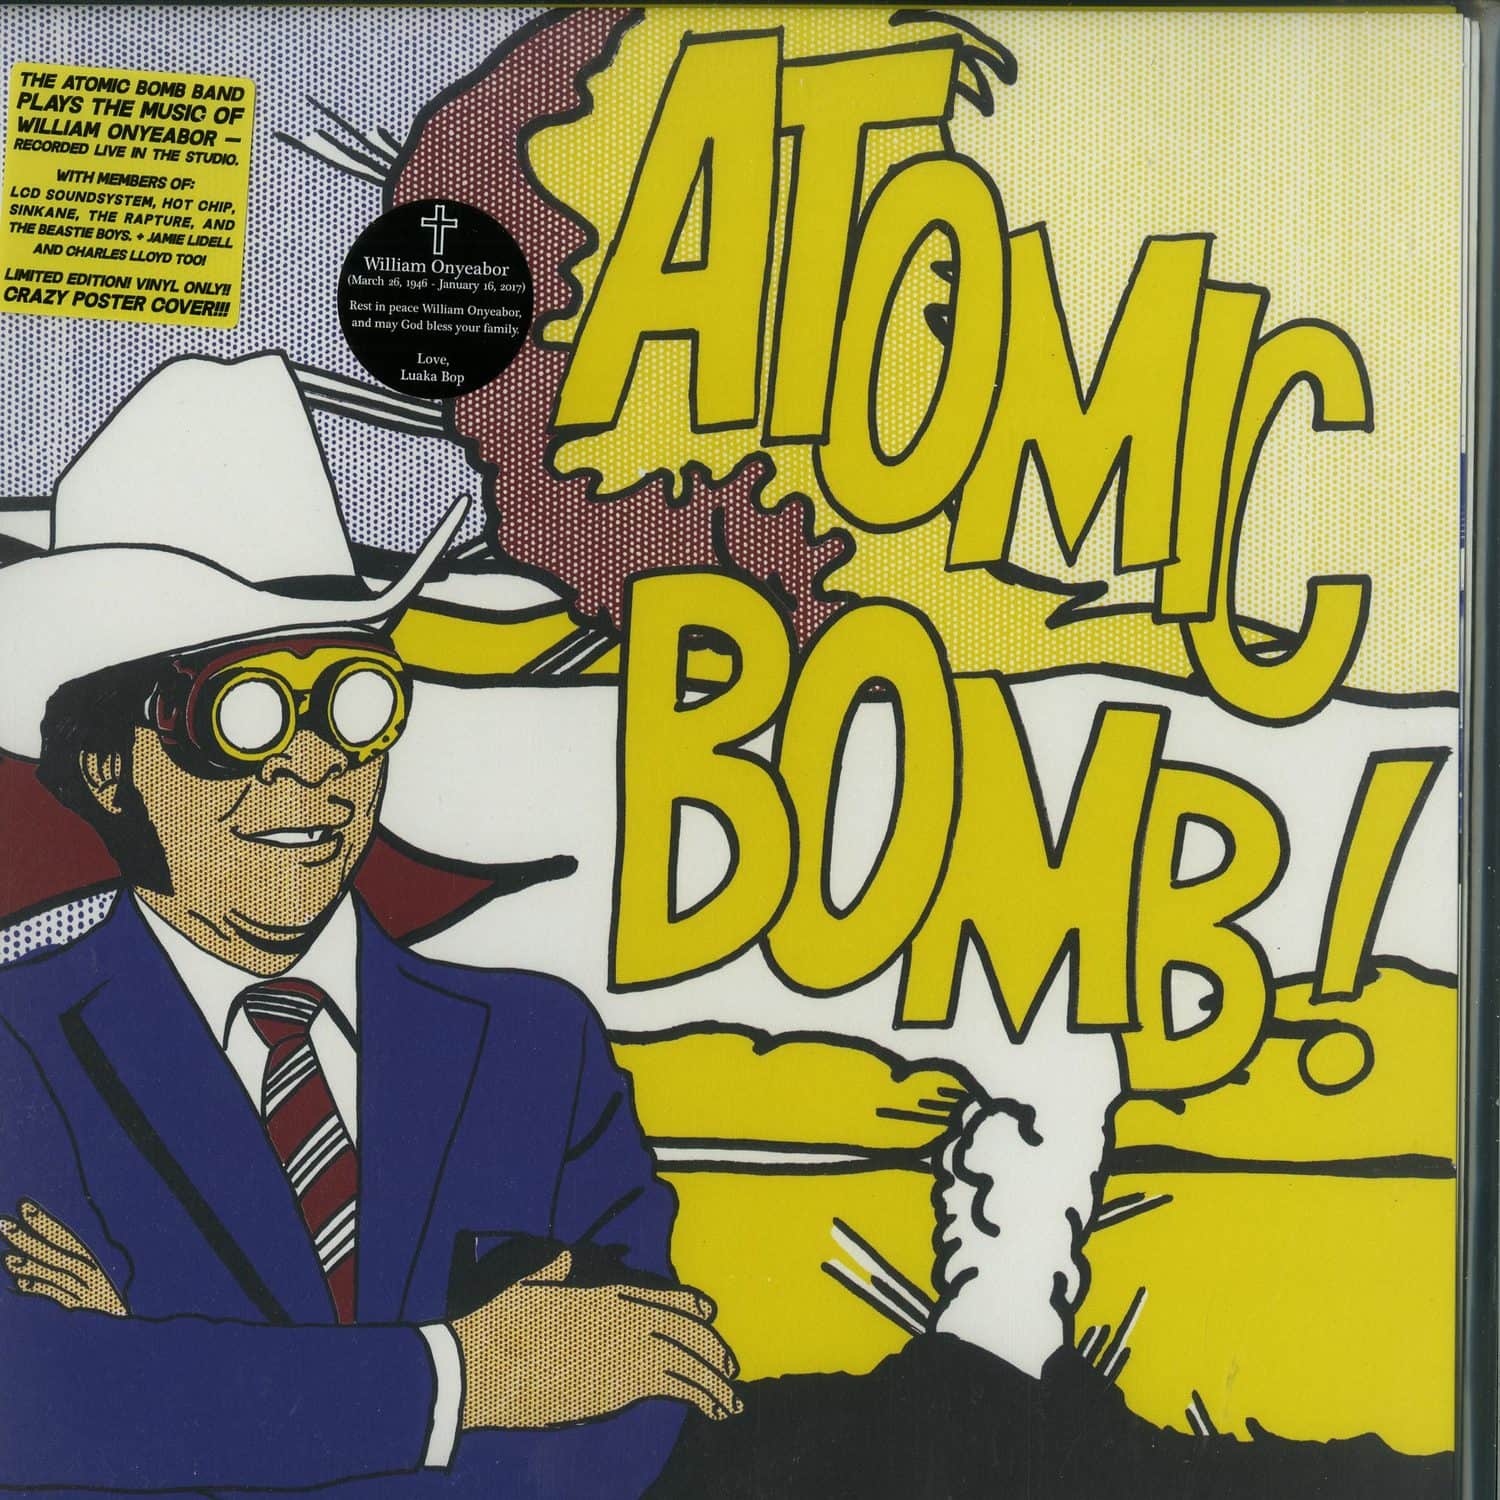 The Atomic Bomb Band - PLAYS THE MUSIC OF WILLIAM ONYEABOR 